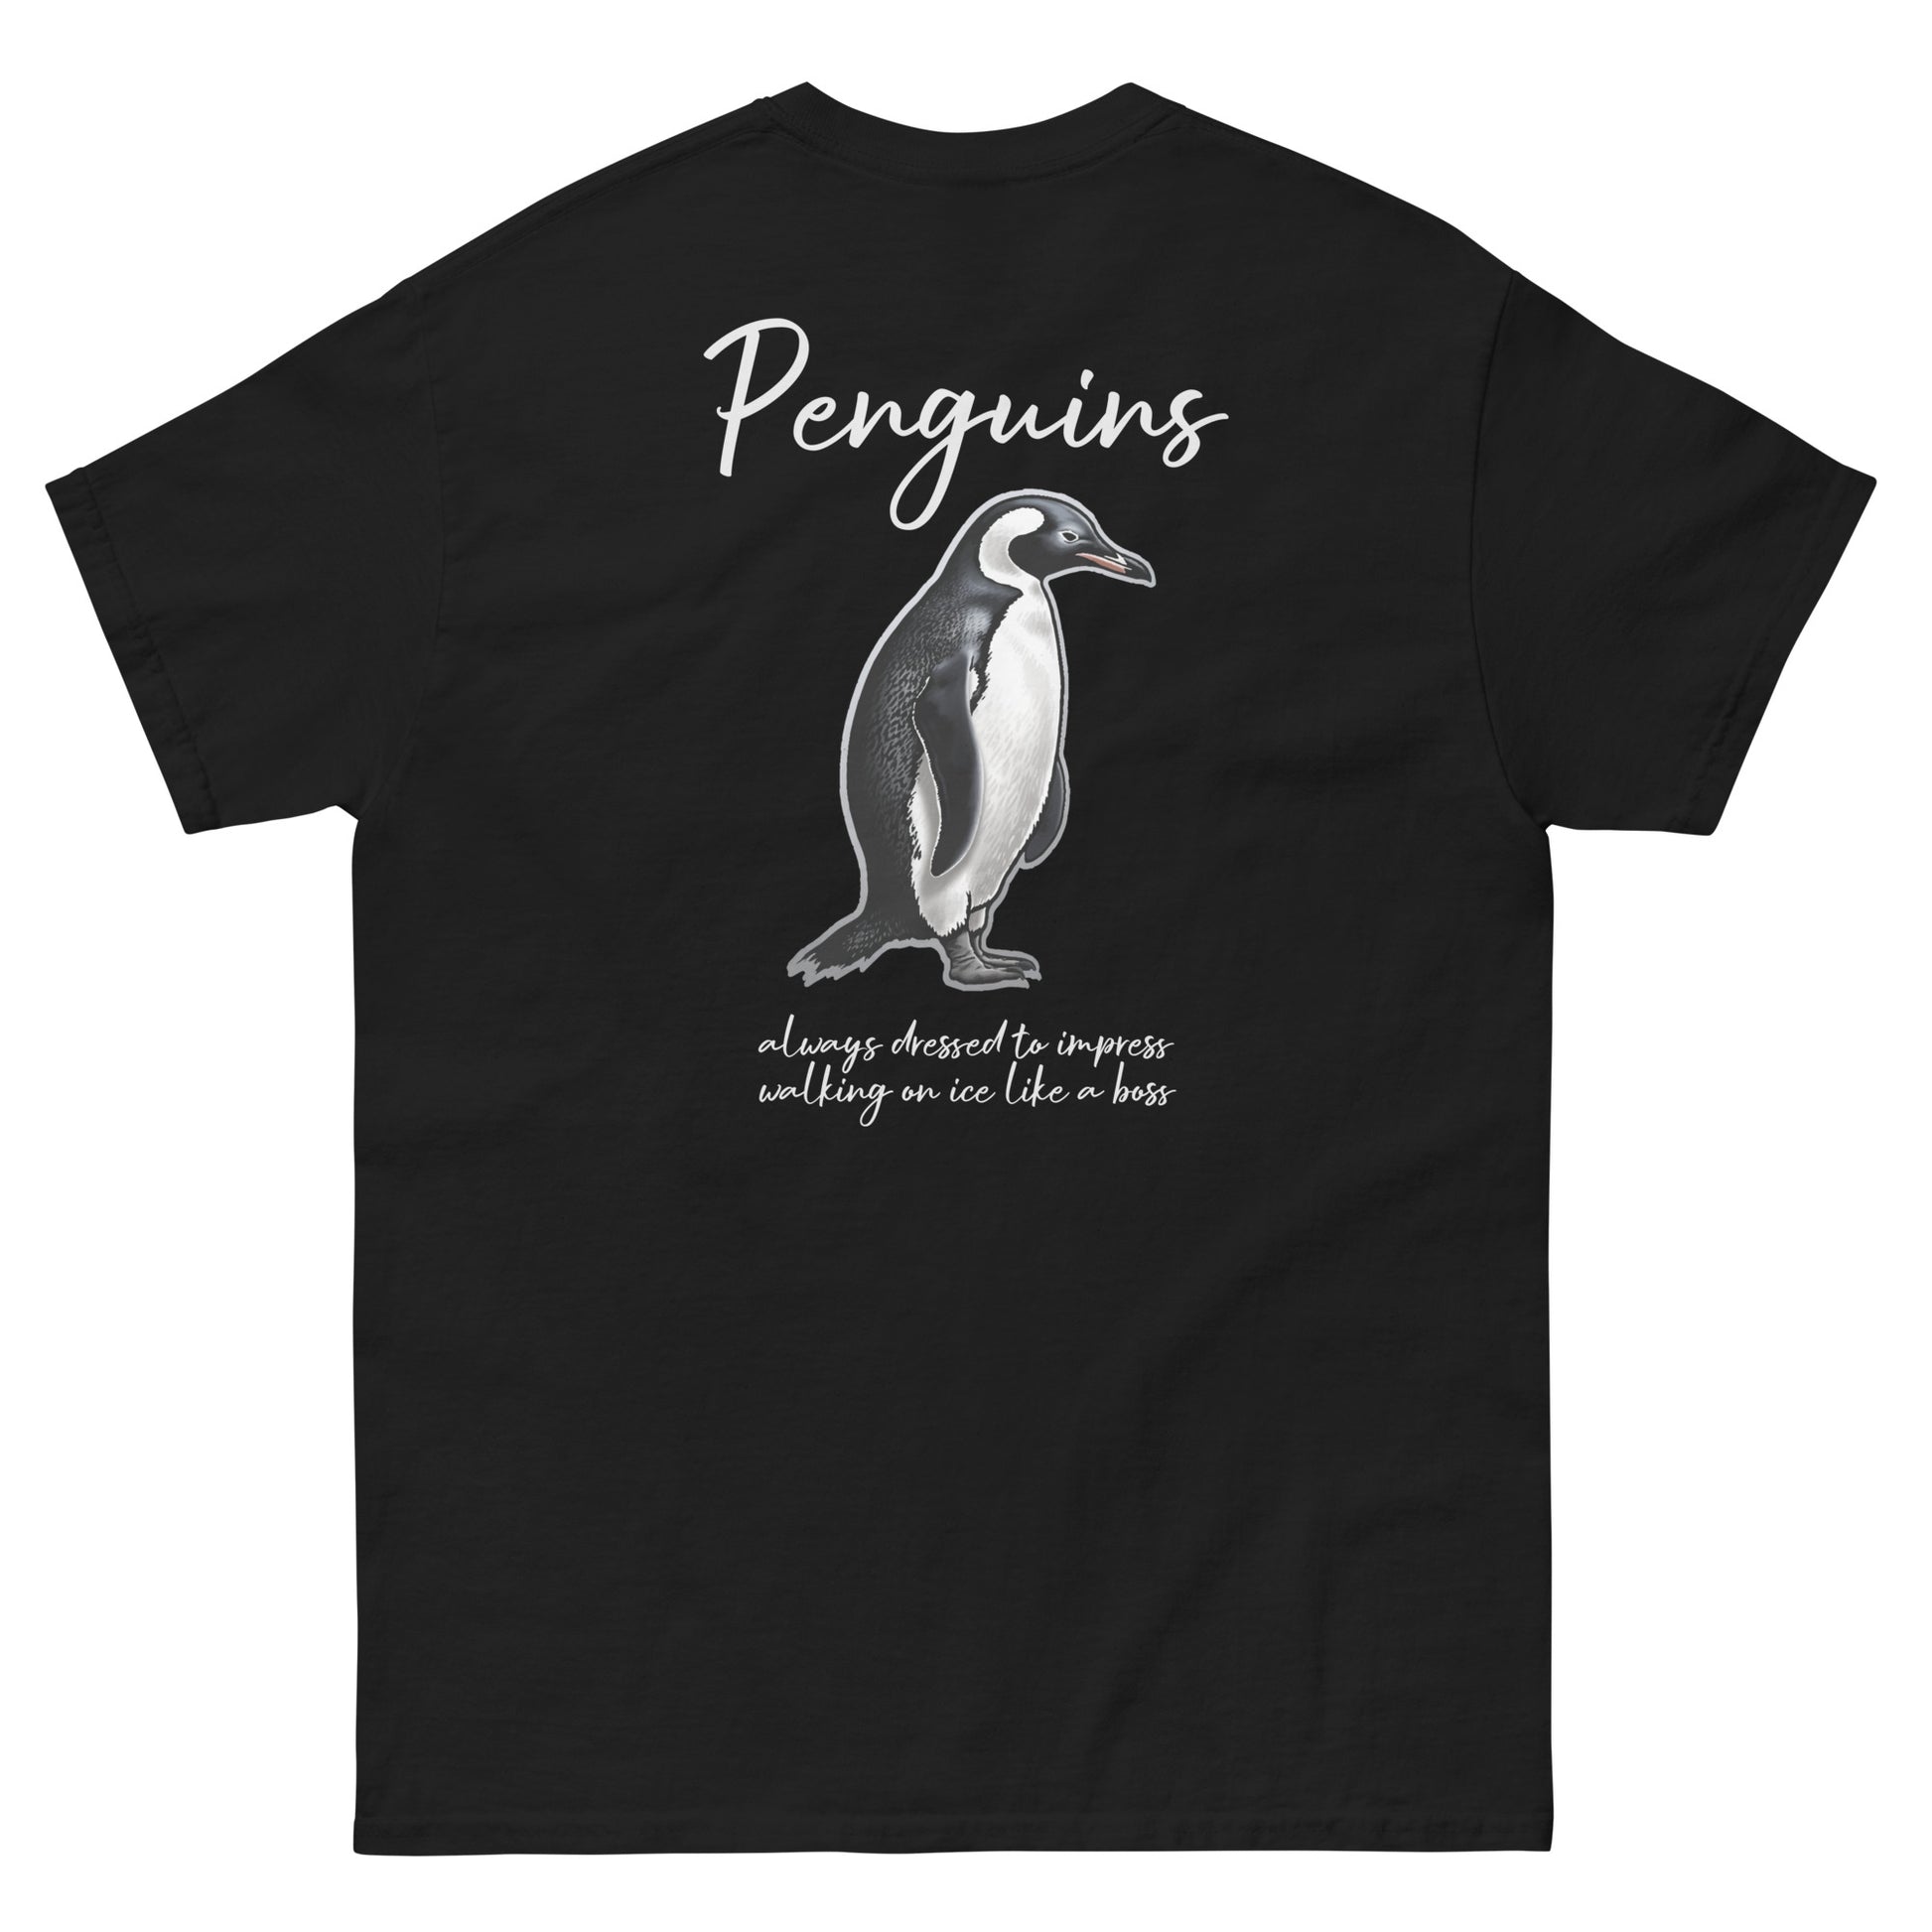 Black High Quality Tee - Front Design with a Penguin on left chest - Back Design with a Penguin and a Phrase "Penguins:always dressed to impress, walking on ice like a boss" print